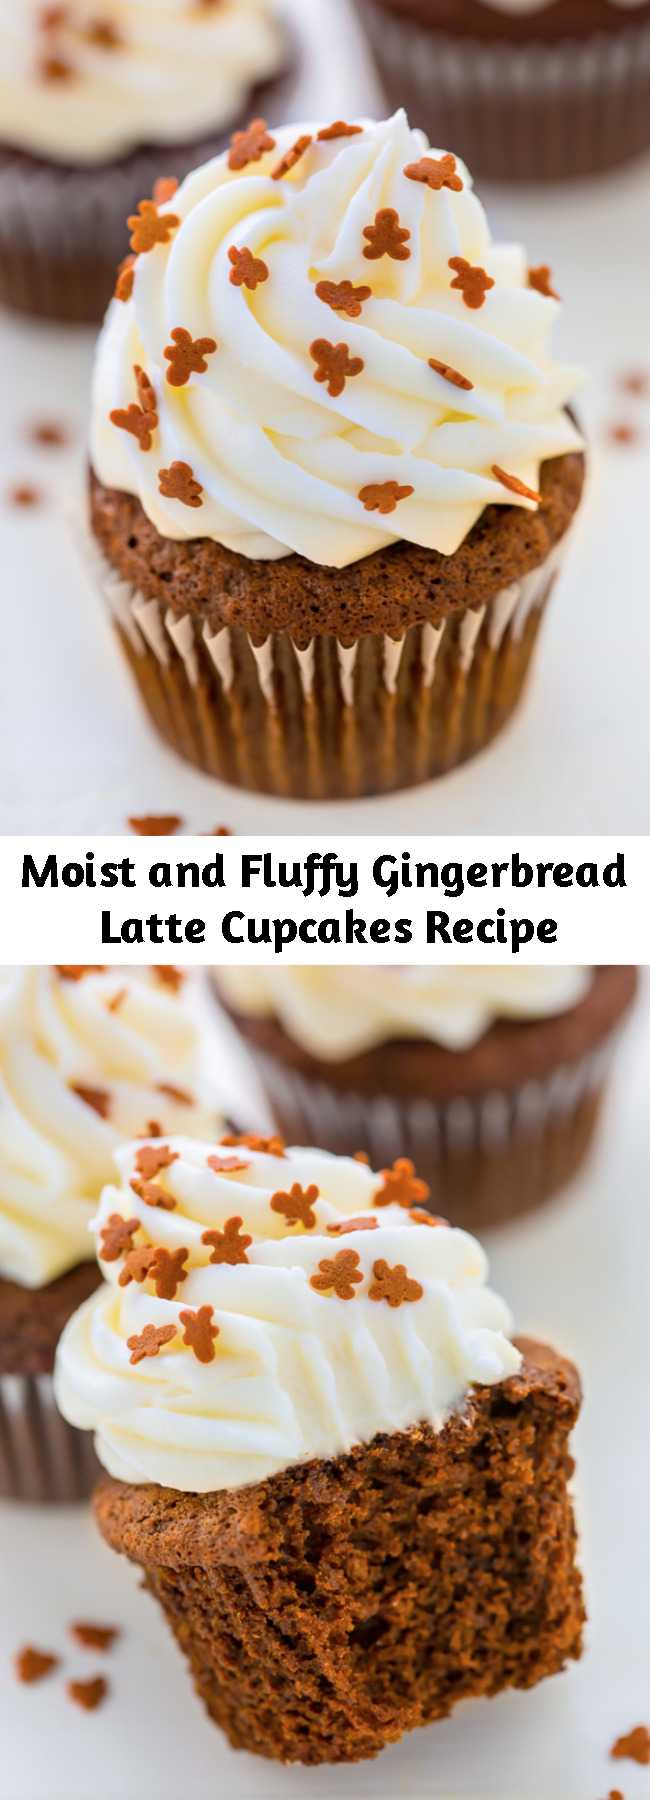 Moist and Fluffy Gingerbread Latte Cupcakes Recipe - These gingerbread latte cupcakes are moist, not too sweet, and perfectly spiced. The cream cheese frosting is thick, fluffy, and flavored with just a kick of fresh lemon. They’re going to be the hit of your holiday party!